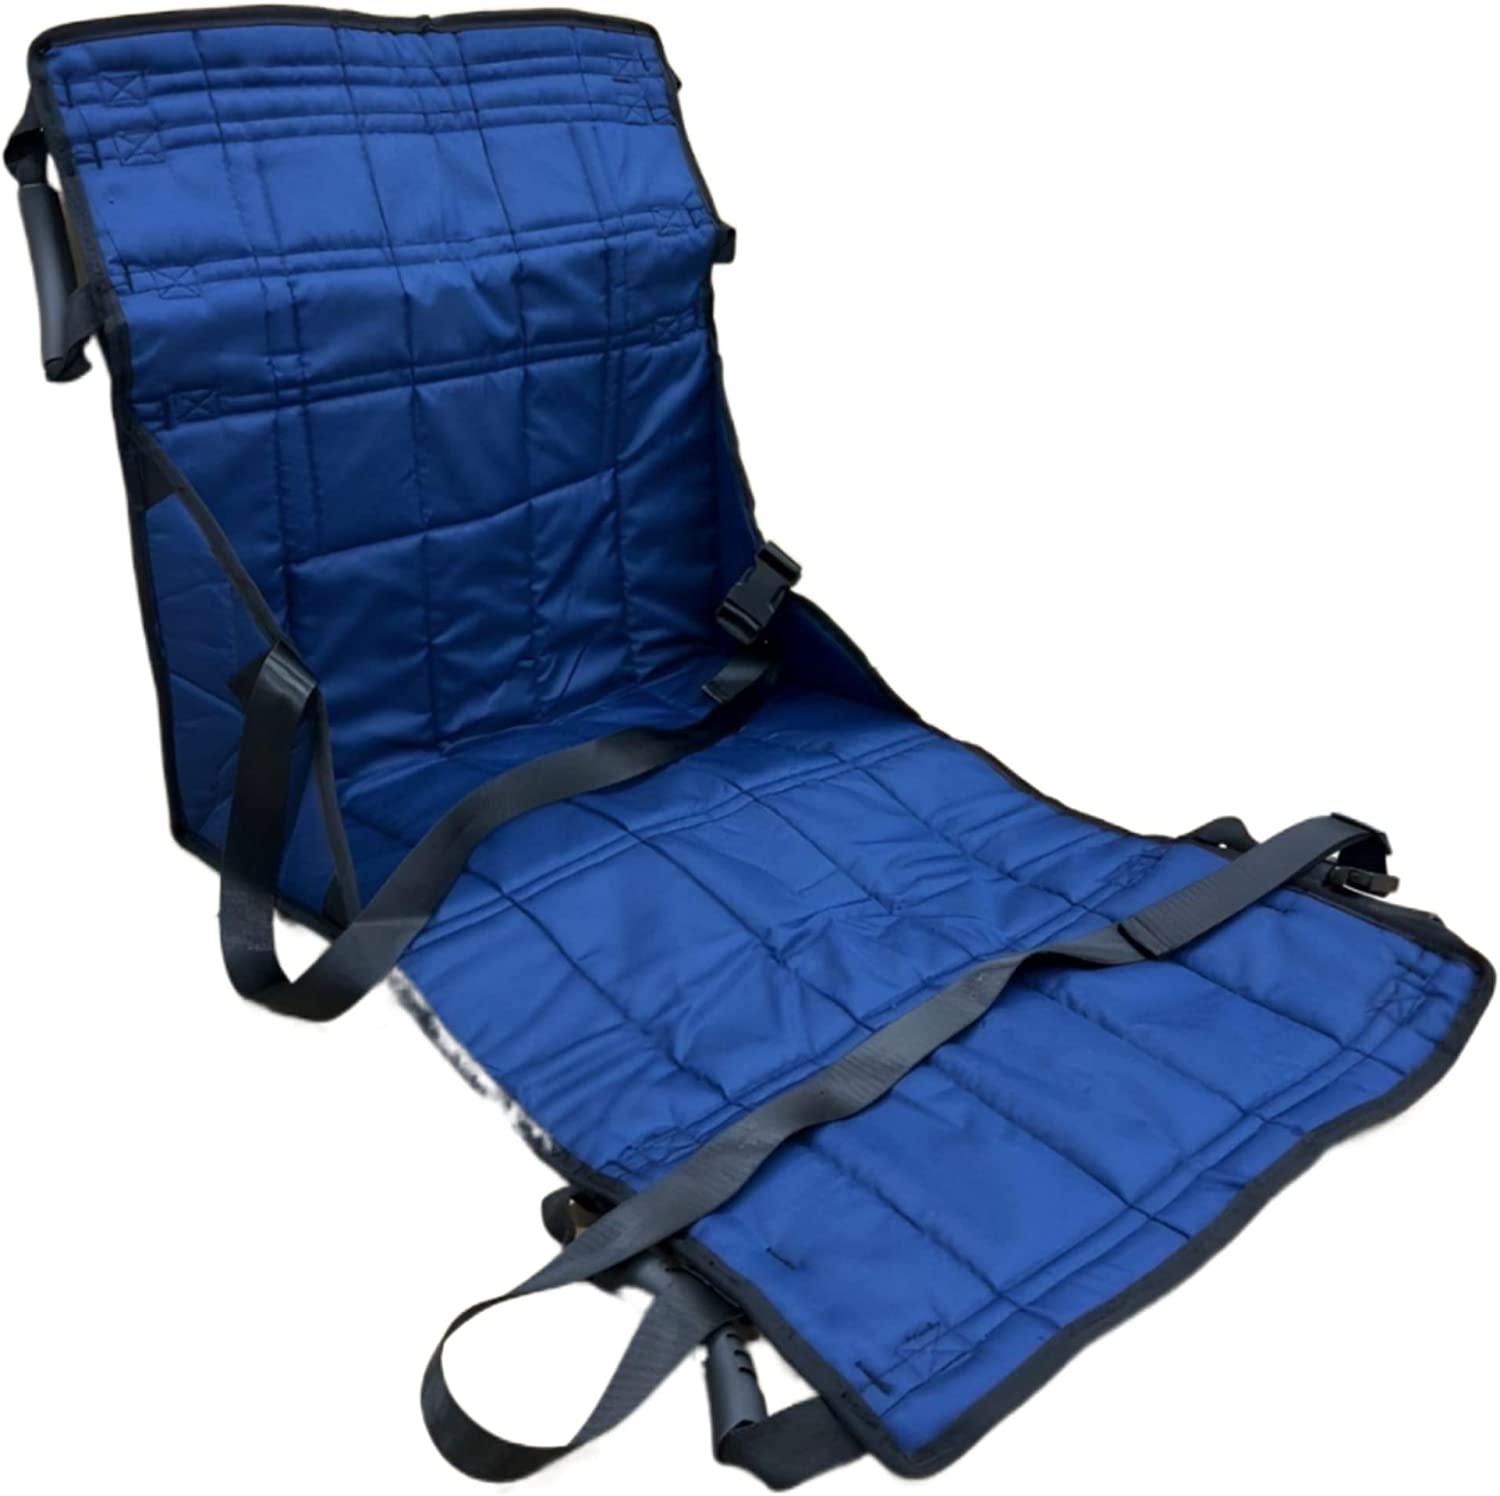  wheelchair for .. assistance seat pillowcase for assistance stretcher folding light weight wheelchair nursing movement support .. navy (WCS01-NV)